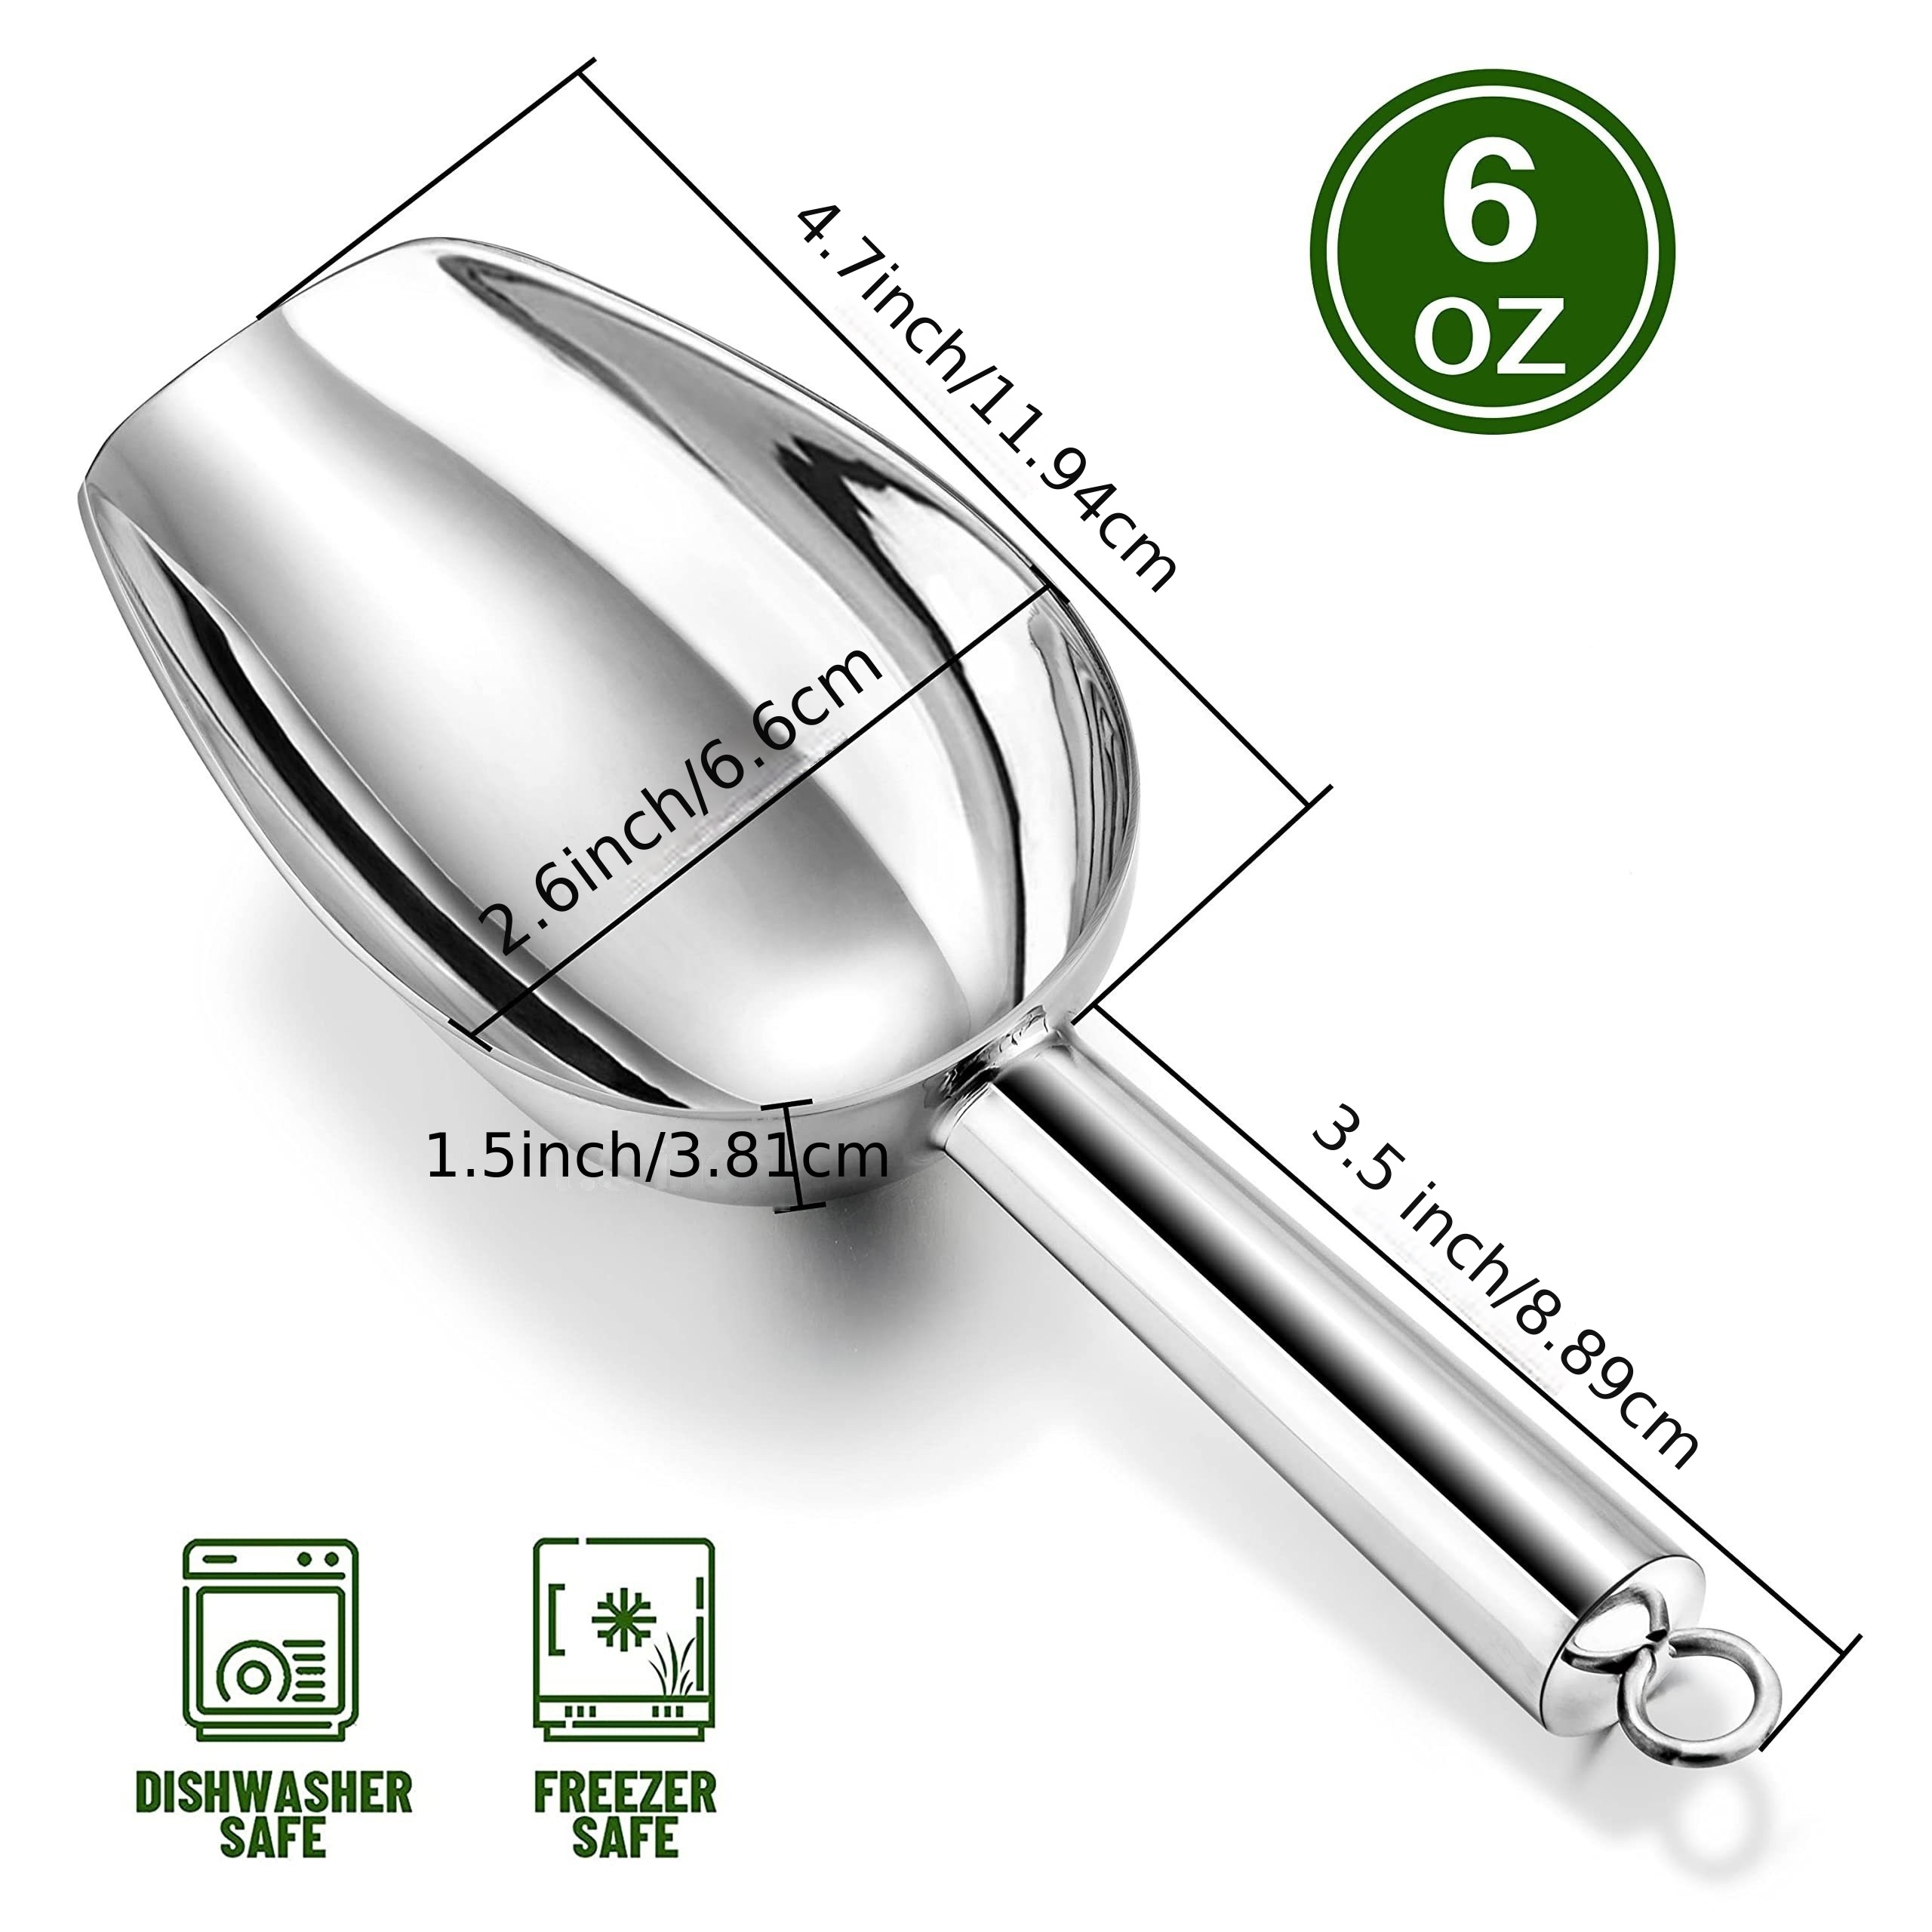  Metal Ice Scoop 3 Oz, Small Stainless Steel Ice scooper for Ice  Maker Ice Bucket Kitchen Freezer Bar Party Wedding, Heavy Duty Ice Cube  Scooper, Food Scoops, Dishwasher Safe, Silver, BBB-3